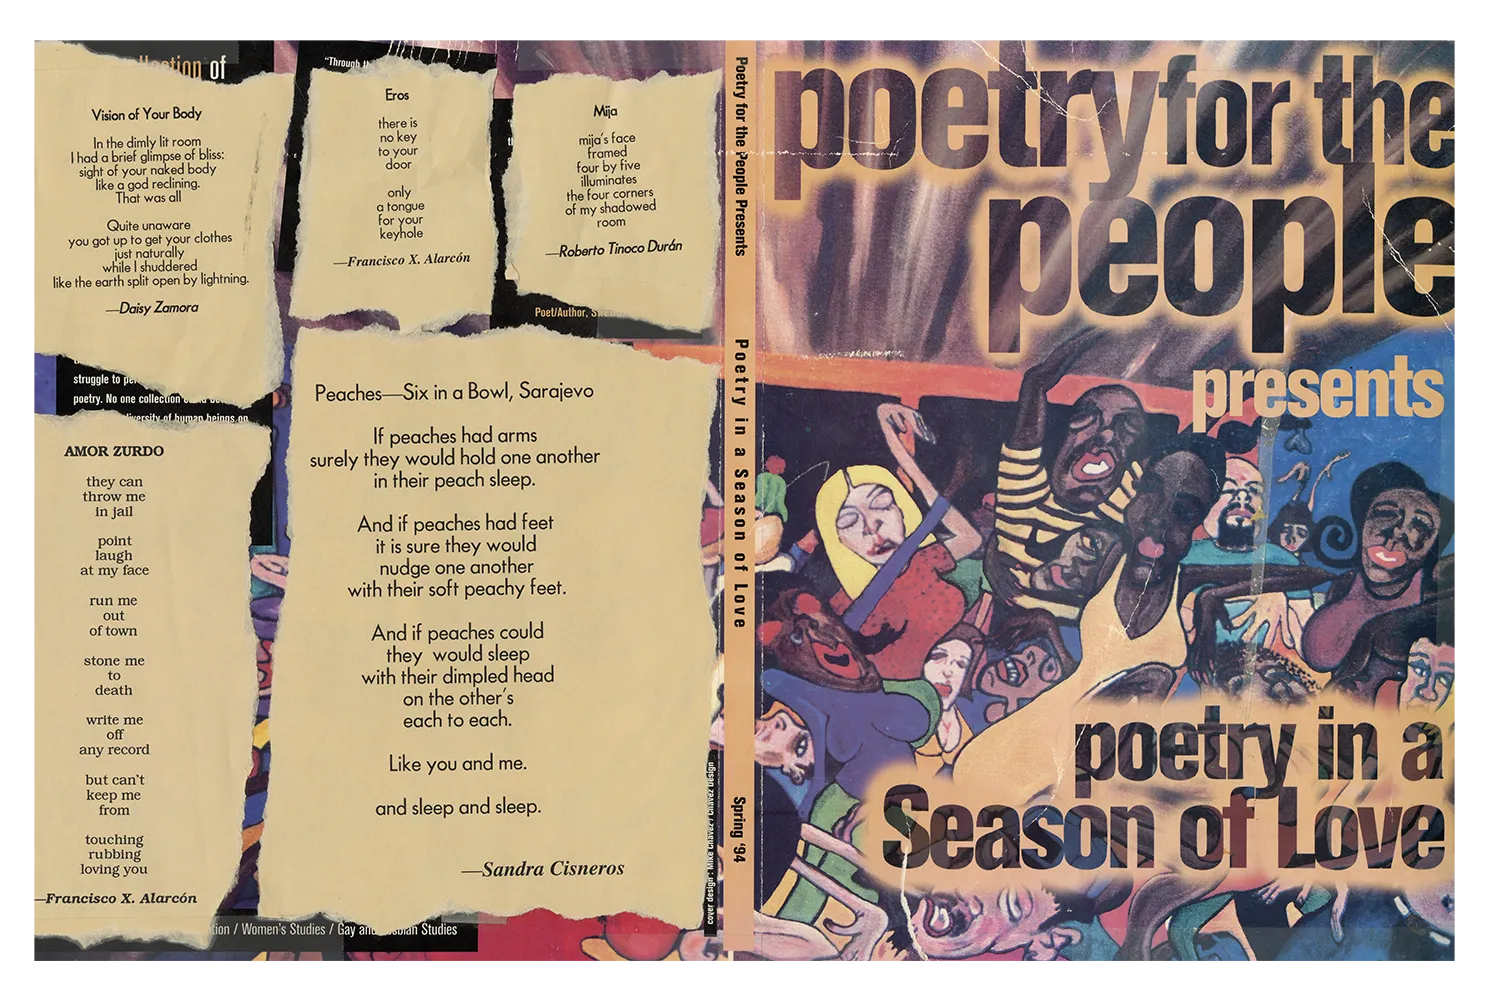 A large colorful poster featuring the cover of the Poetry for the People anthology Season of Love. On the left are fragments of poems and on the right is a group of dancers